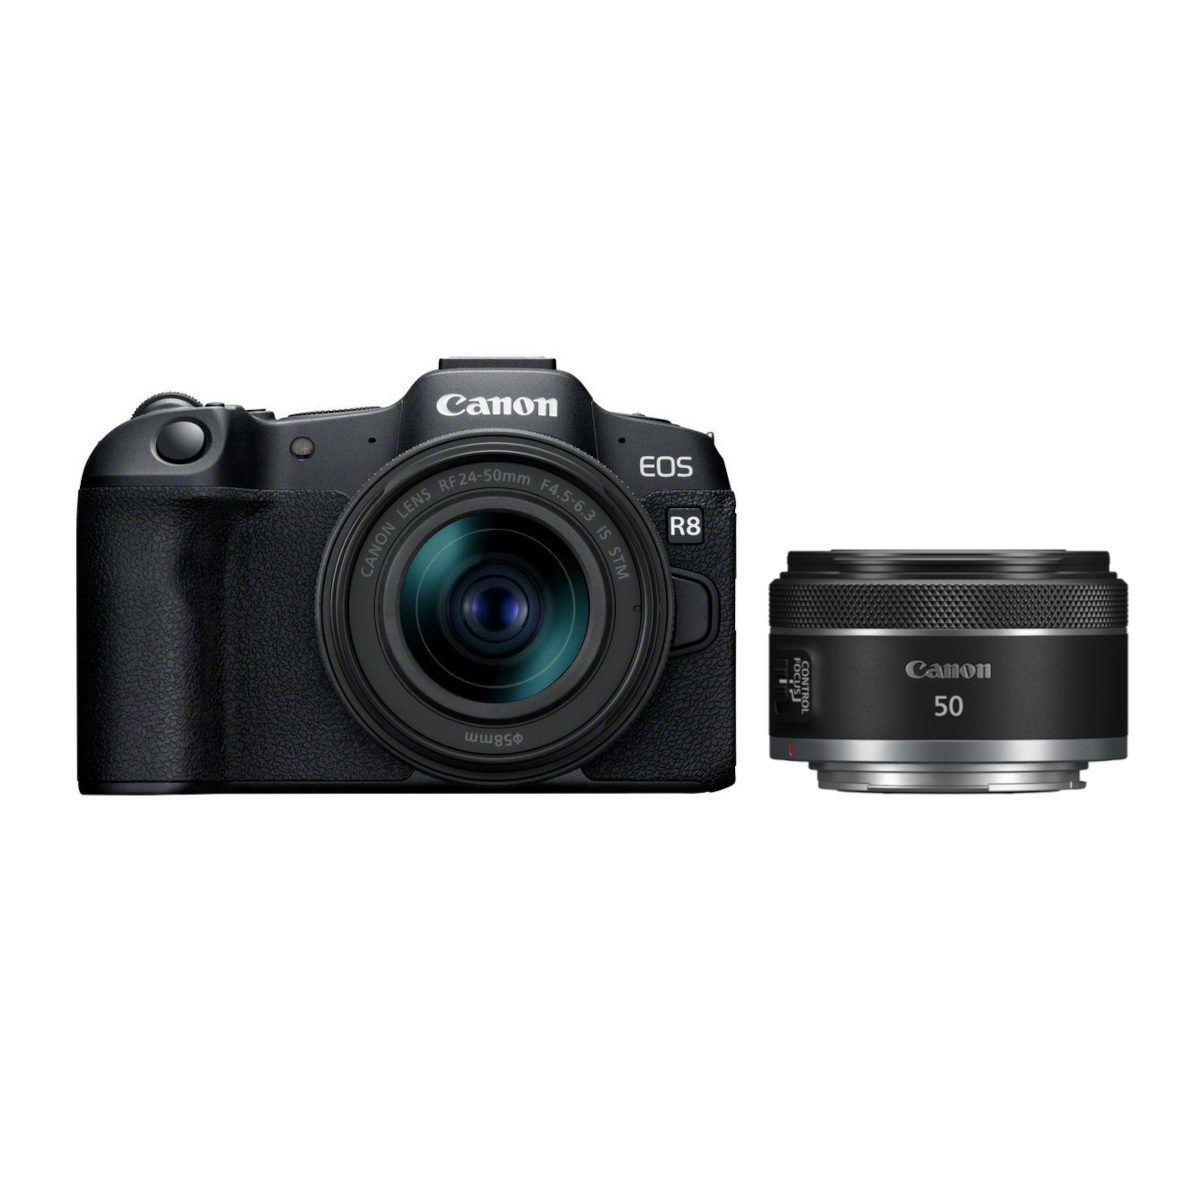 Canon Canon EOS R8 systeemcamera Zwart + RF 24-50mm f/4.5-6.3 IS STM + RF 50mm f/1.8 STM